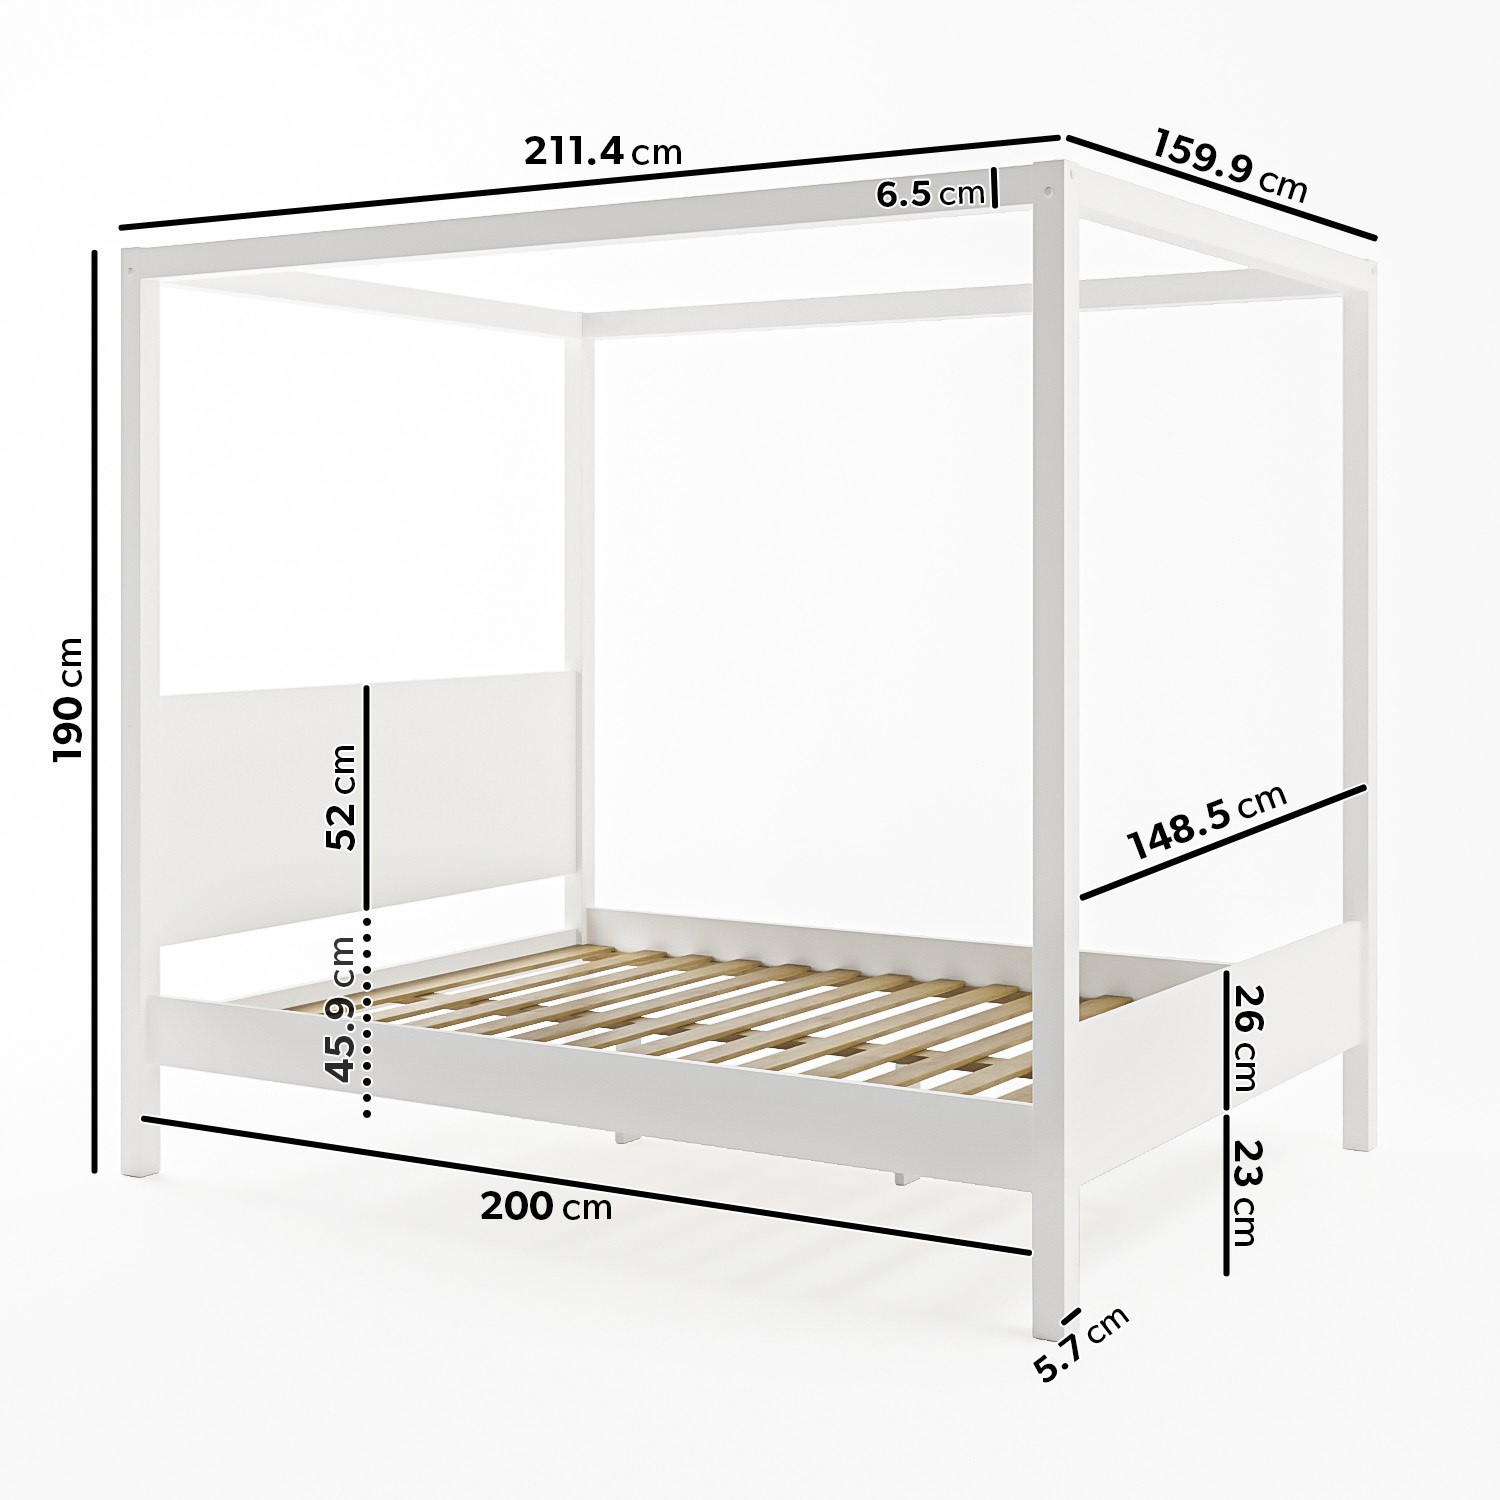 Read more about King size four poster bed frame in white victoria